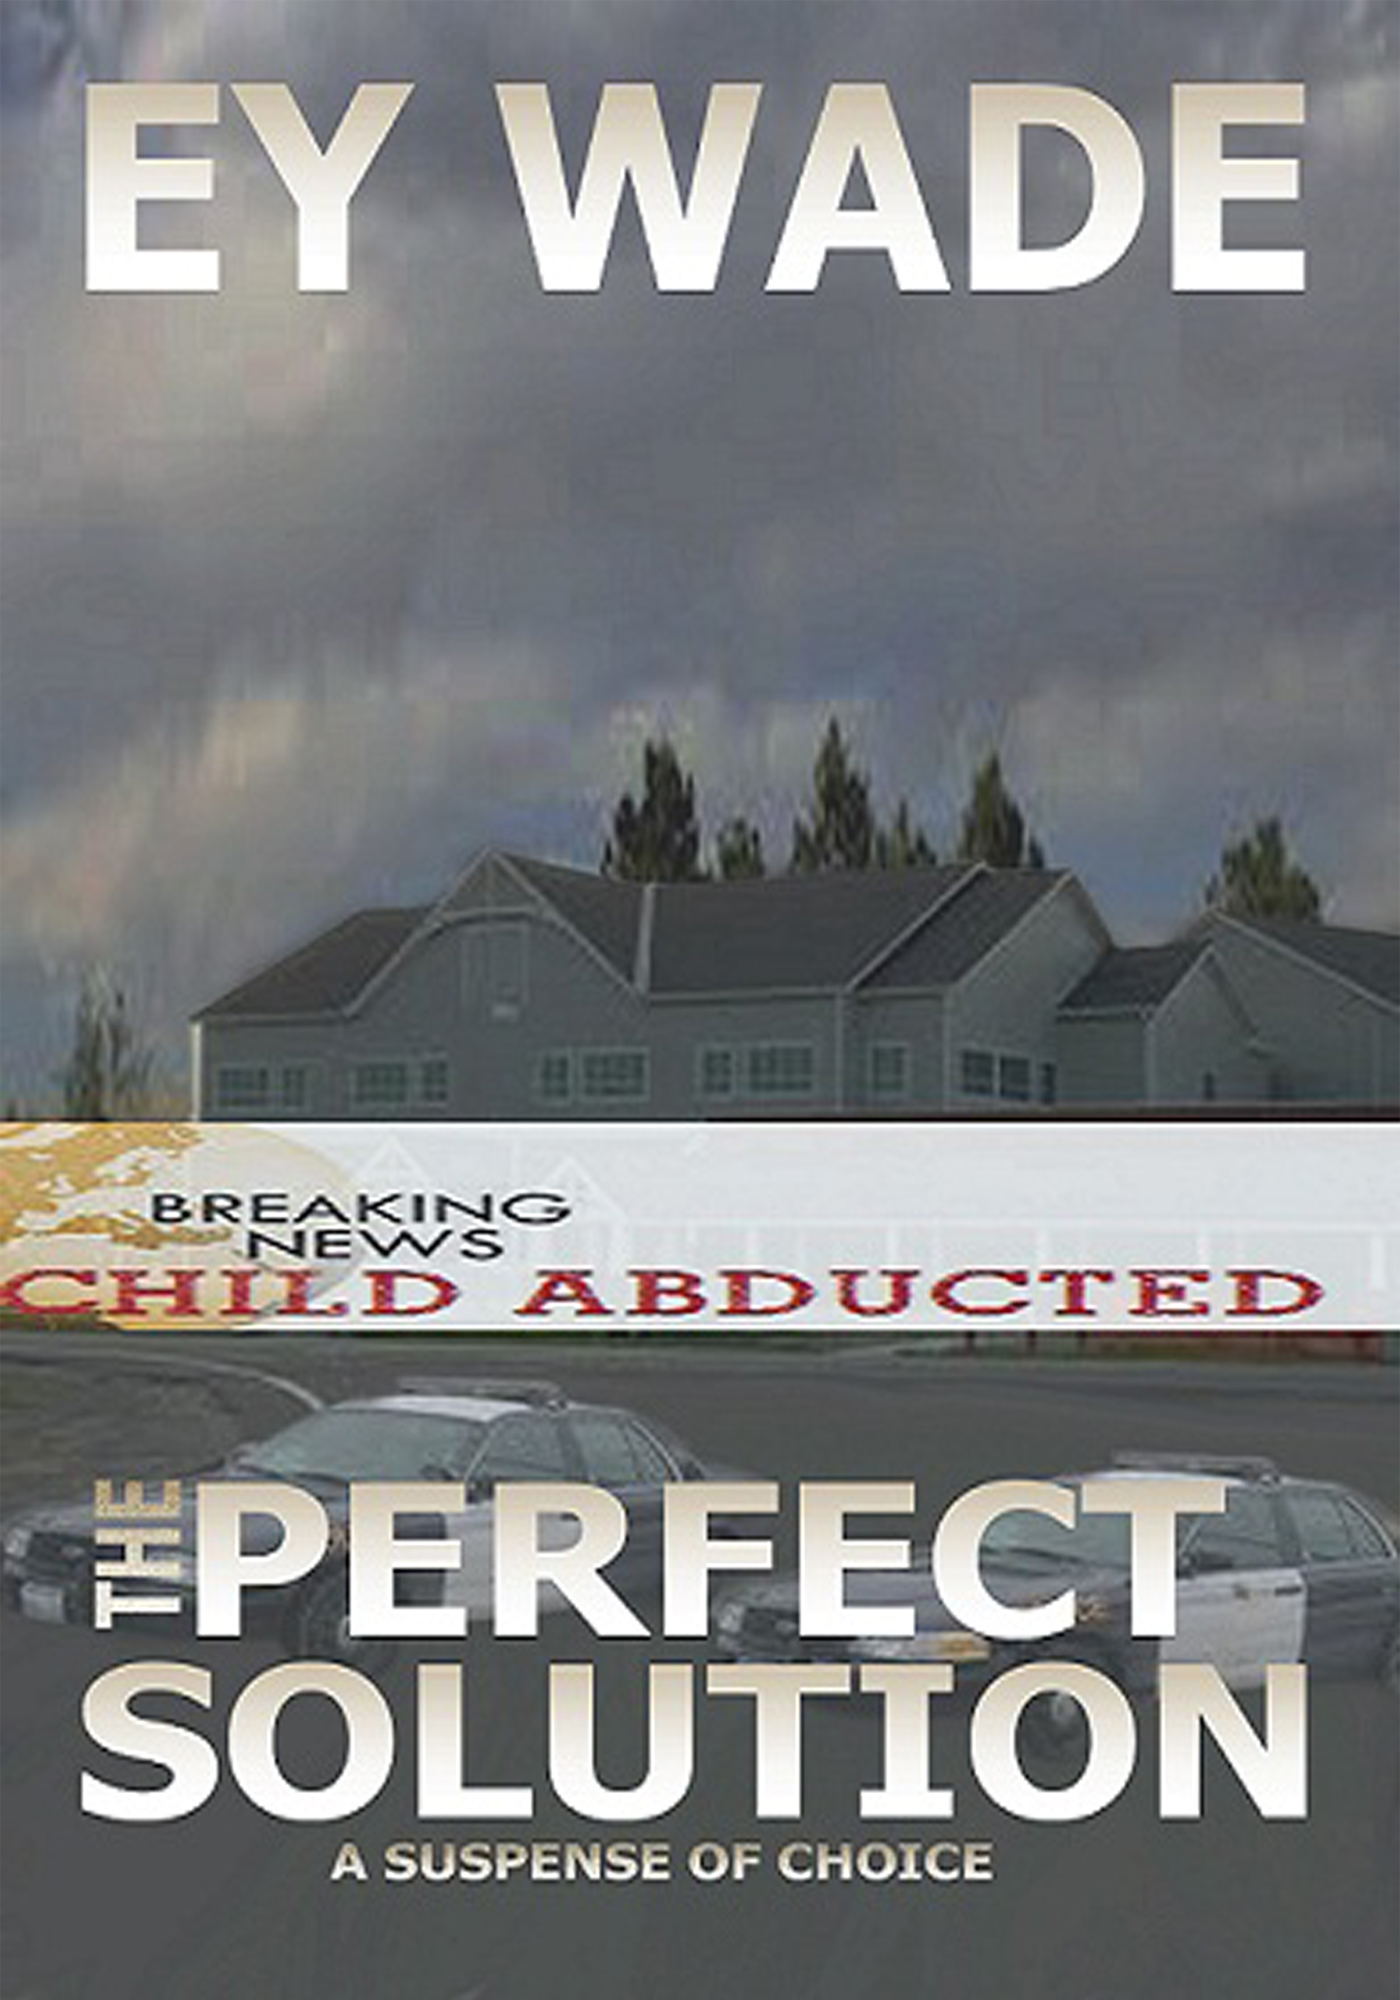 The Perfect Solution - A Suspense in Choices